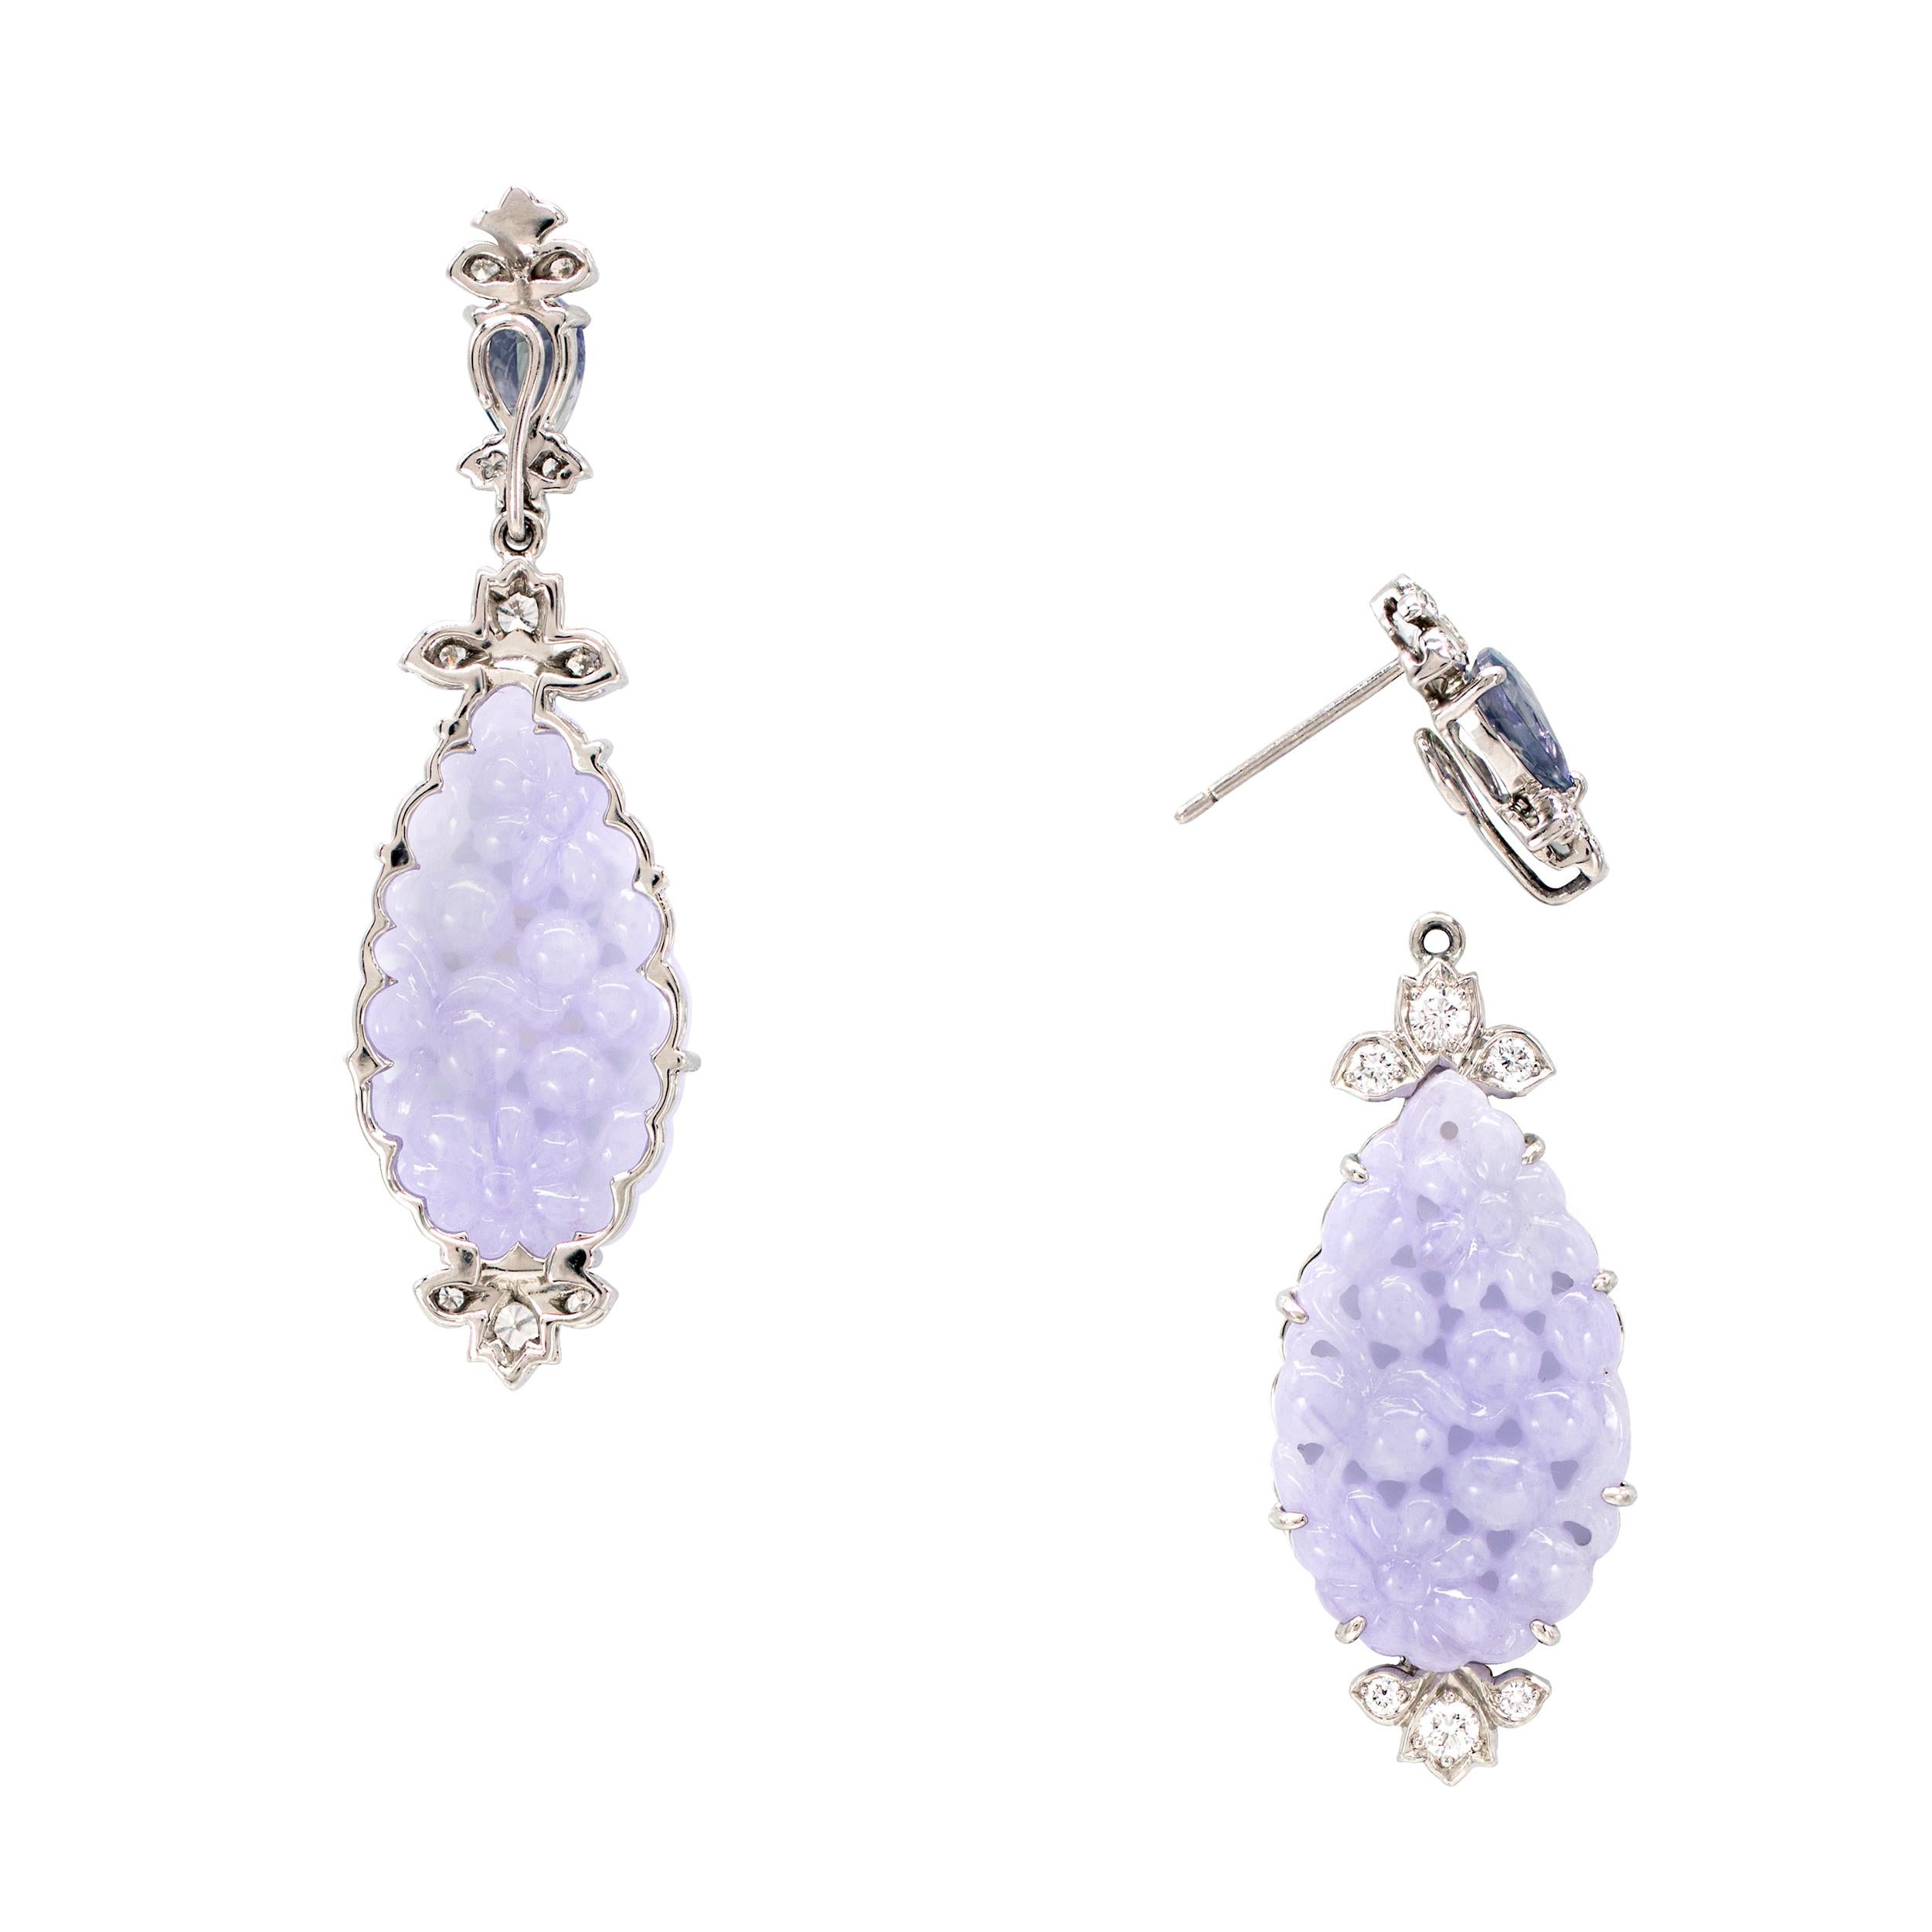 Bona Dea came to mind as the design for these stunning Lavender Jadeite earrings.  She is the Classical Greek Goddess of Women. She was believed to protect women through all of their changes in life. It is no wonder Lavender Jadeite was chosen for